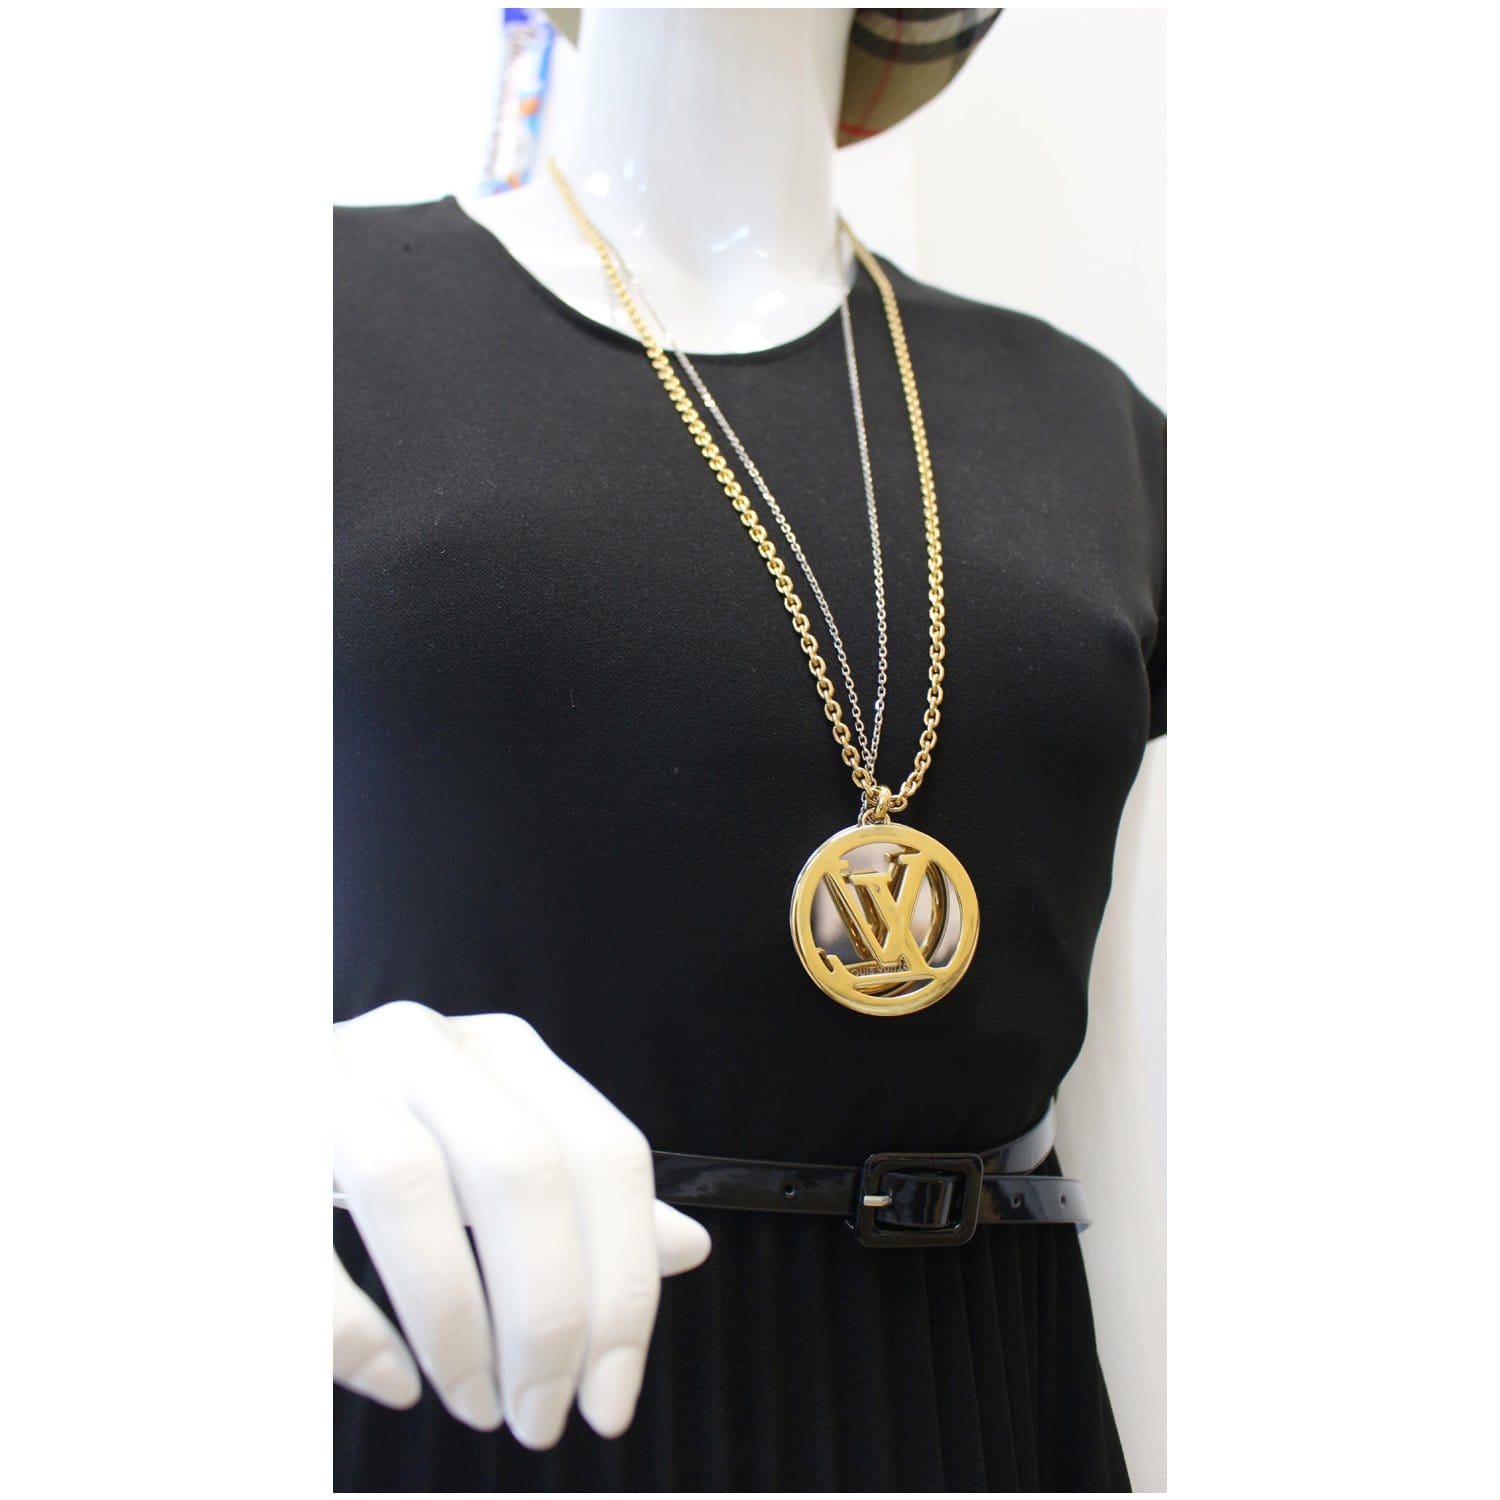 Louis Vuitton My LV Chain Necklace Gold Metal